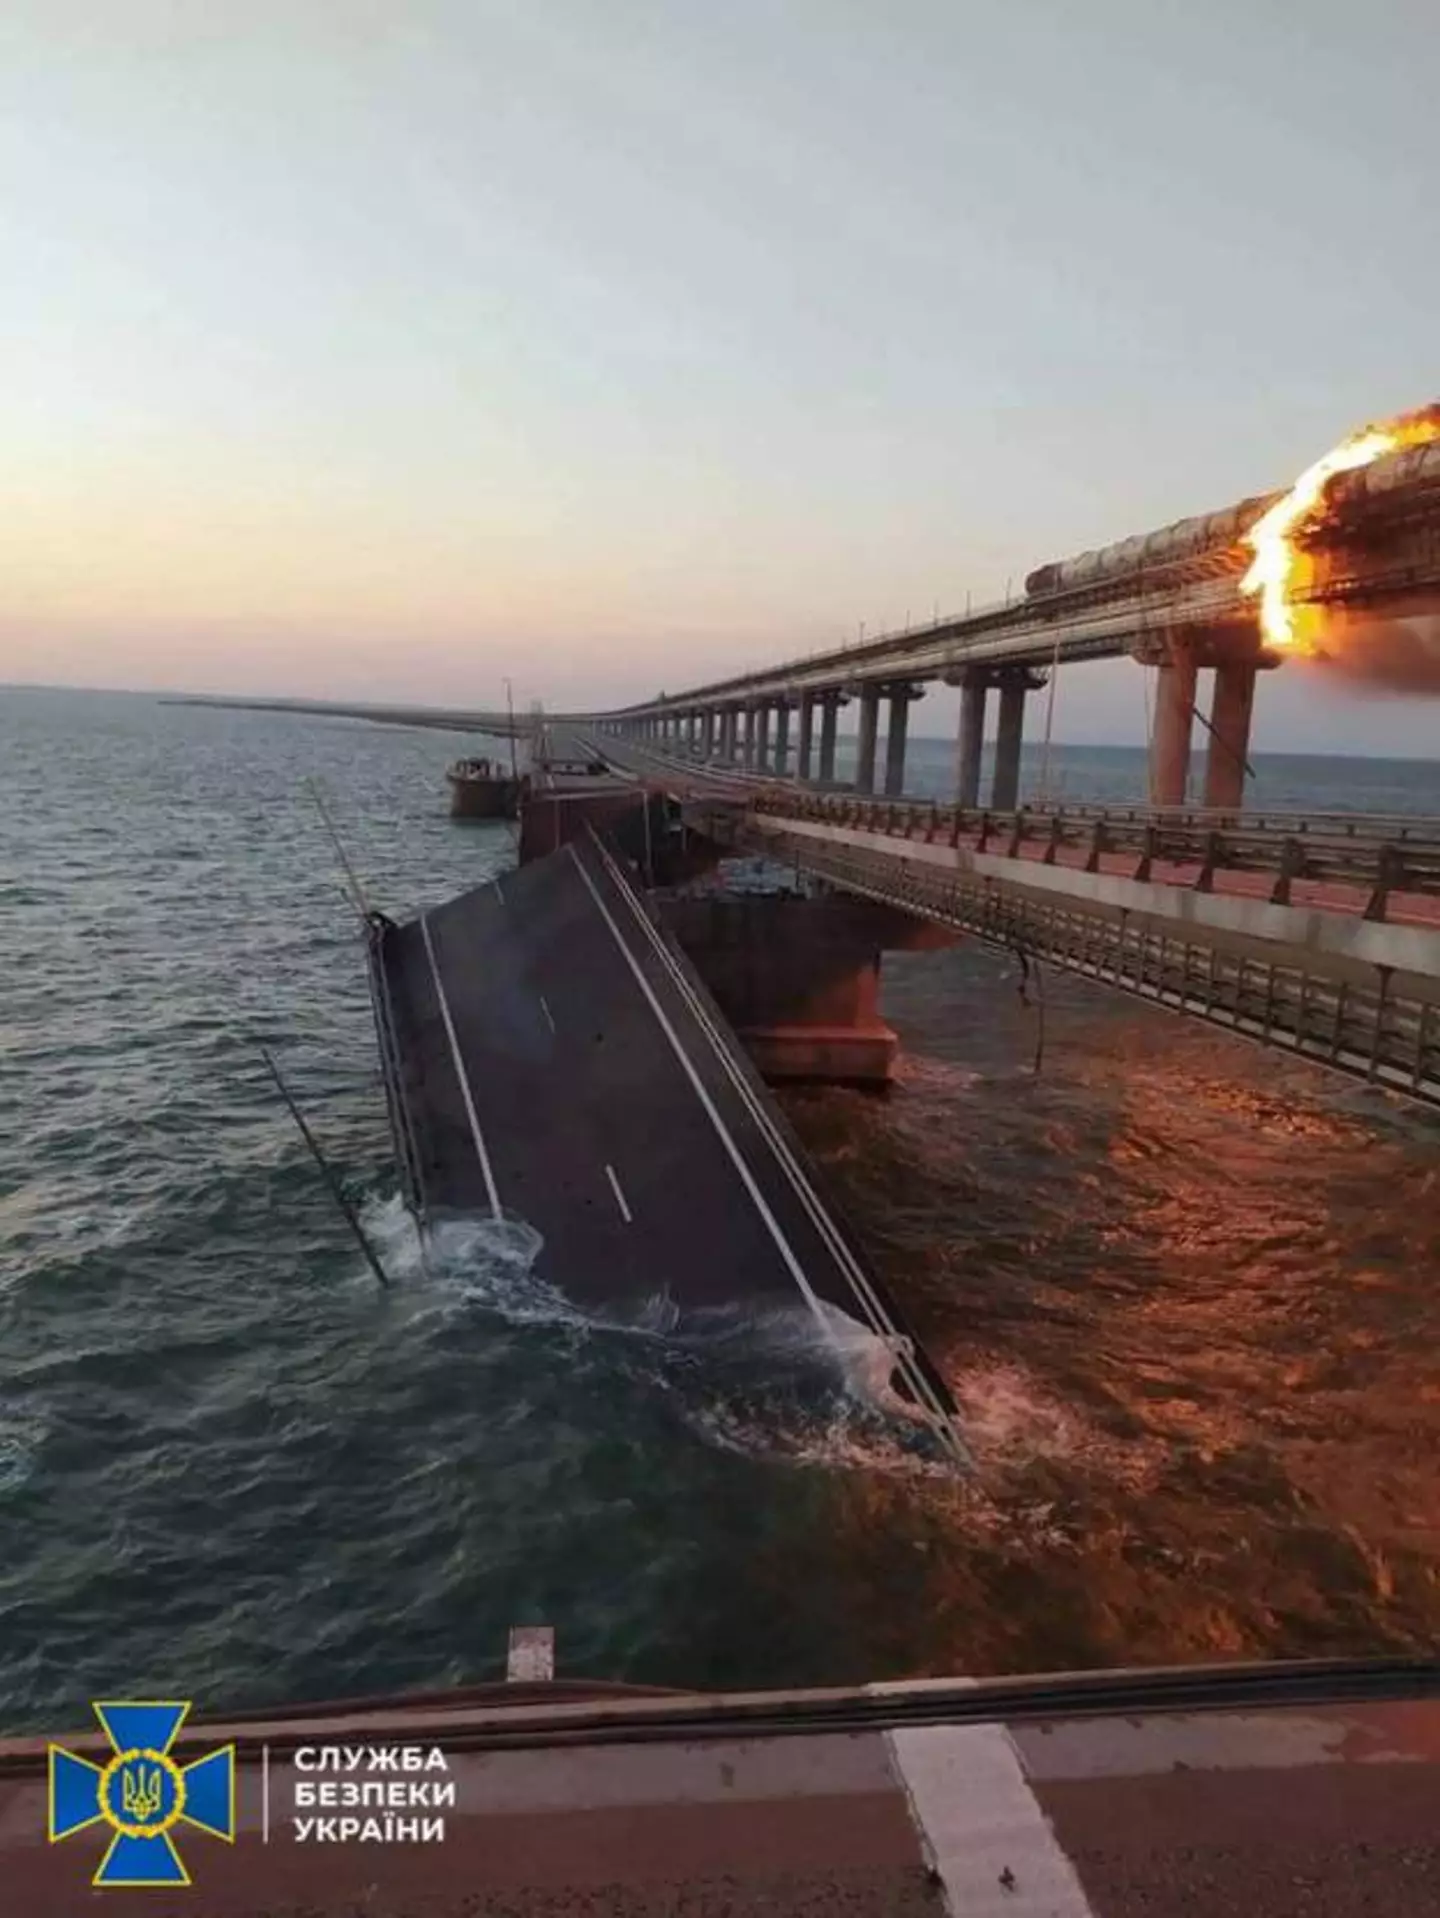 Large sections of the bridge between Russia and Crimea have collapsed.